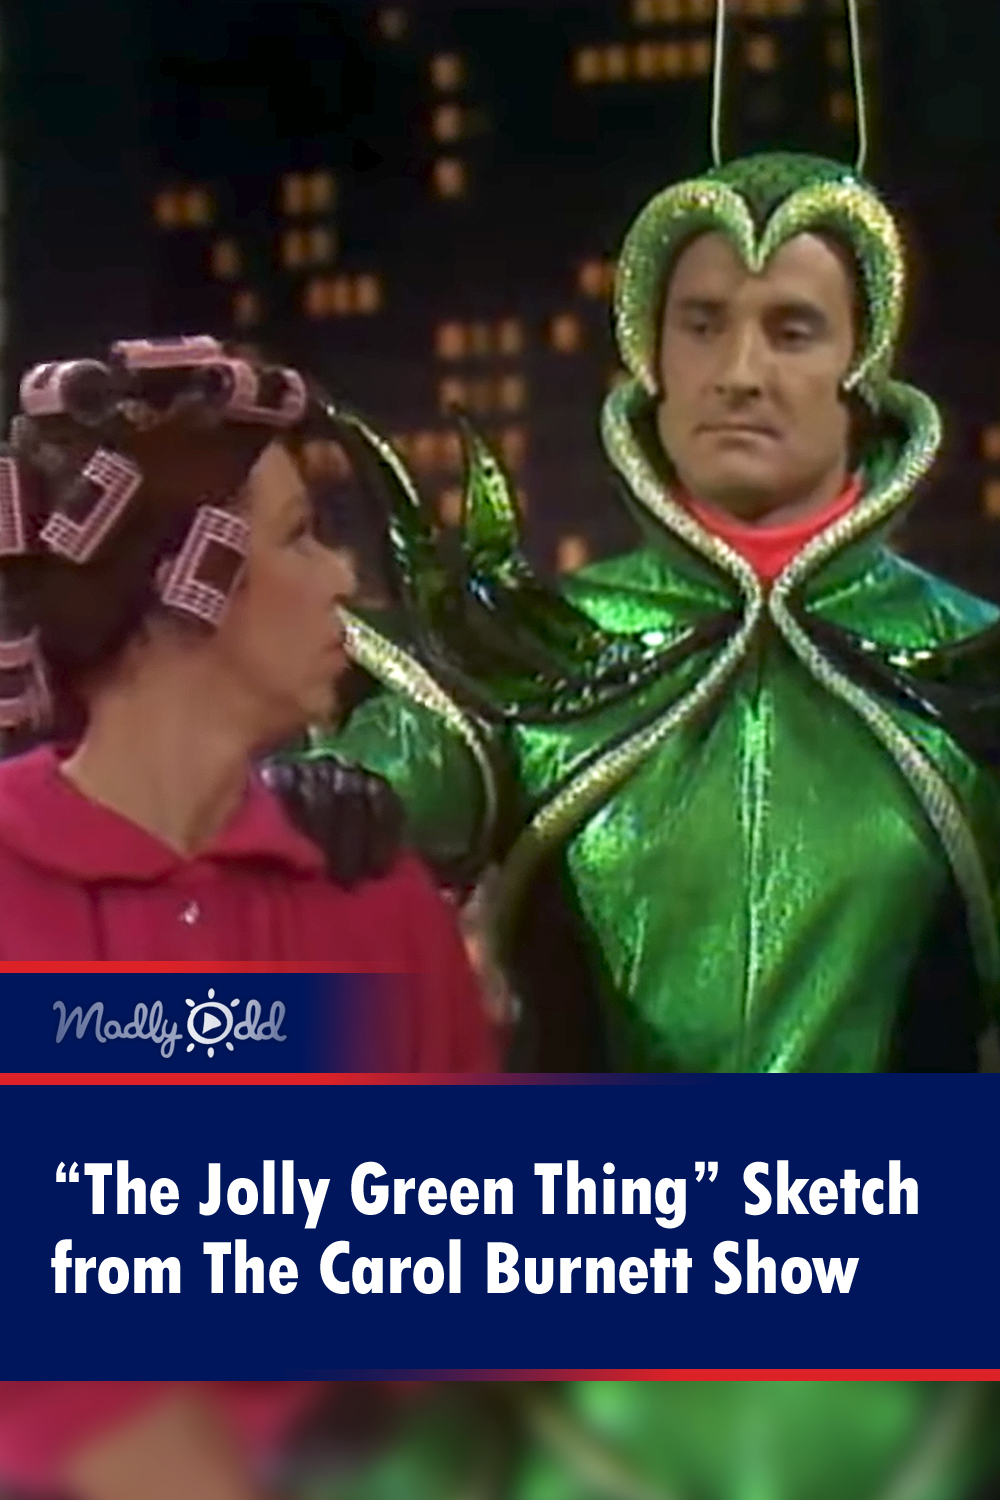 “The Jolly Green Thing” Sketch from The Carol Burnett Show